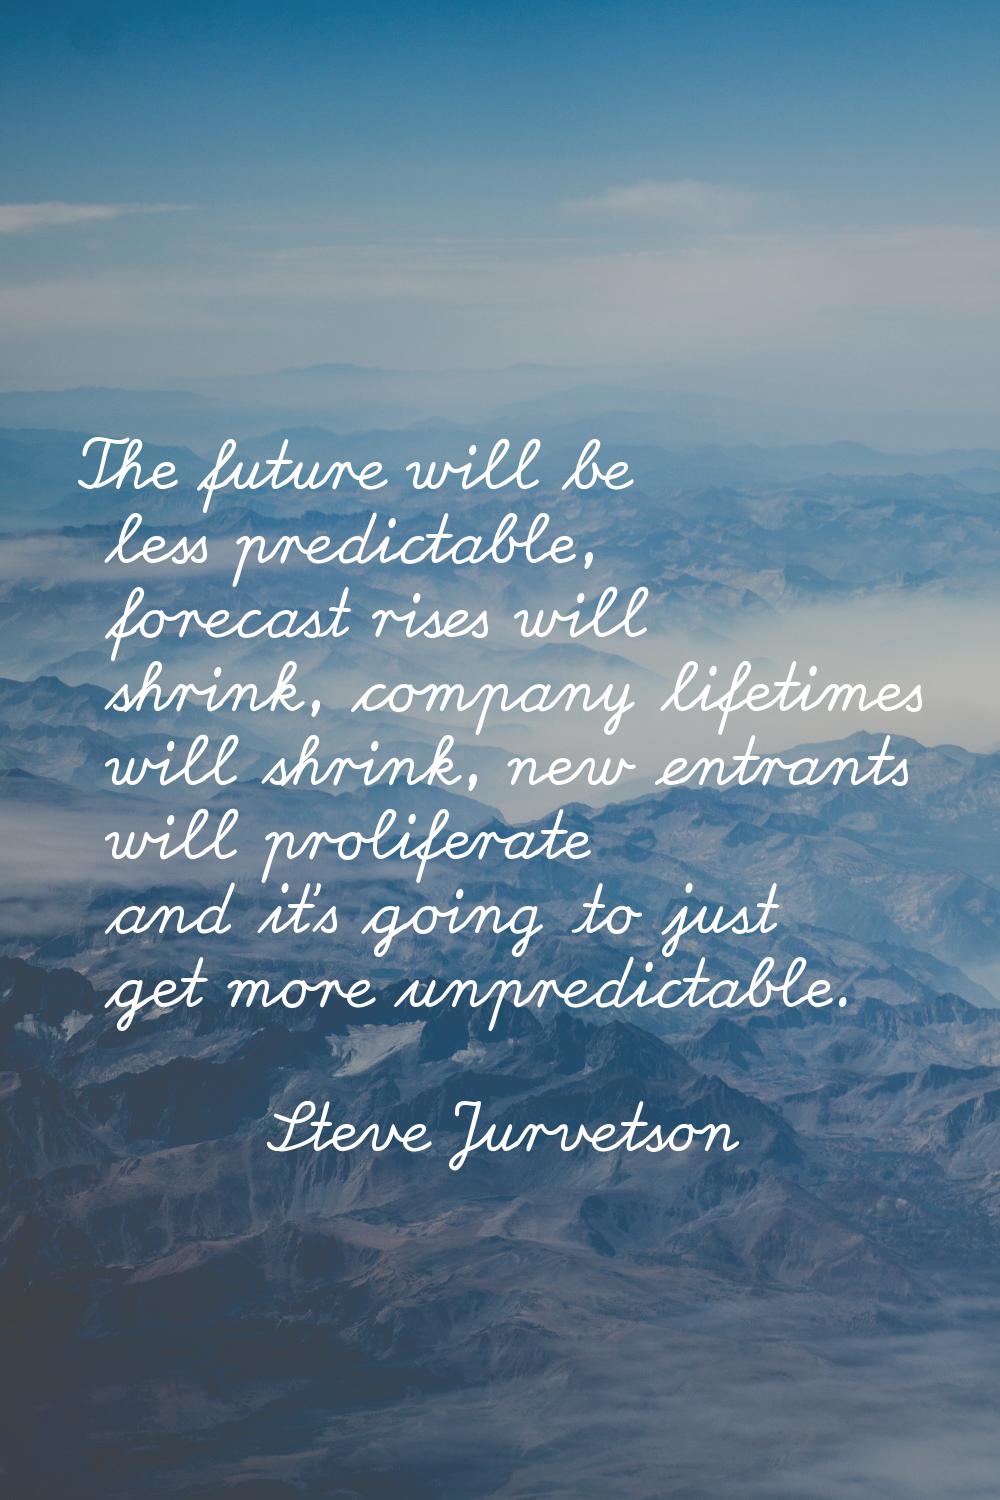 The future will be less predictable, forecast rises will shrink, company lifetimes will shrink, new